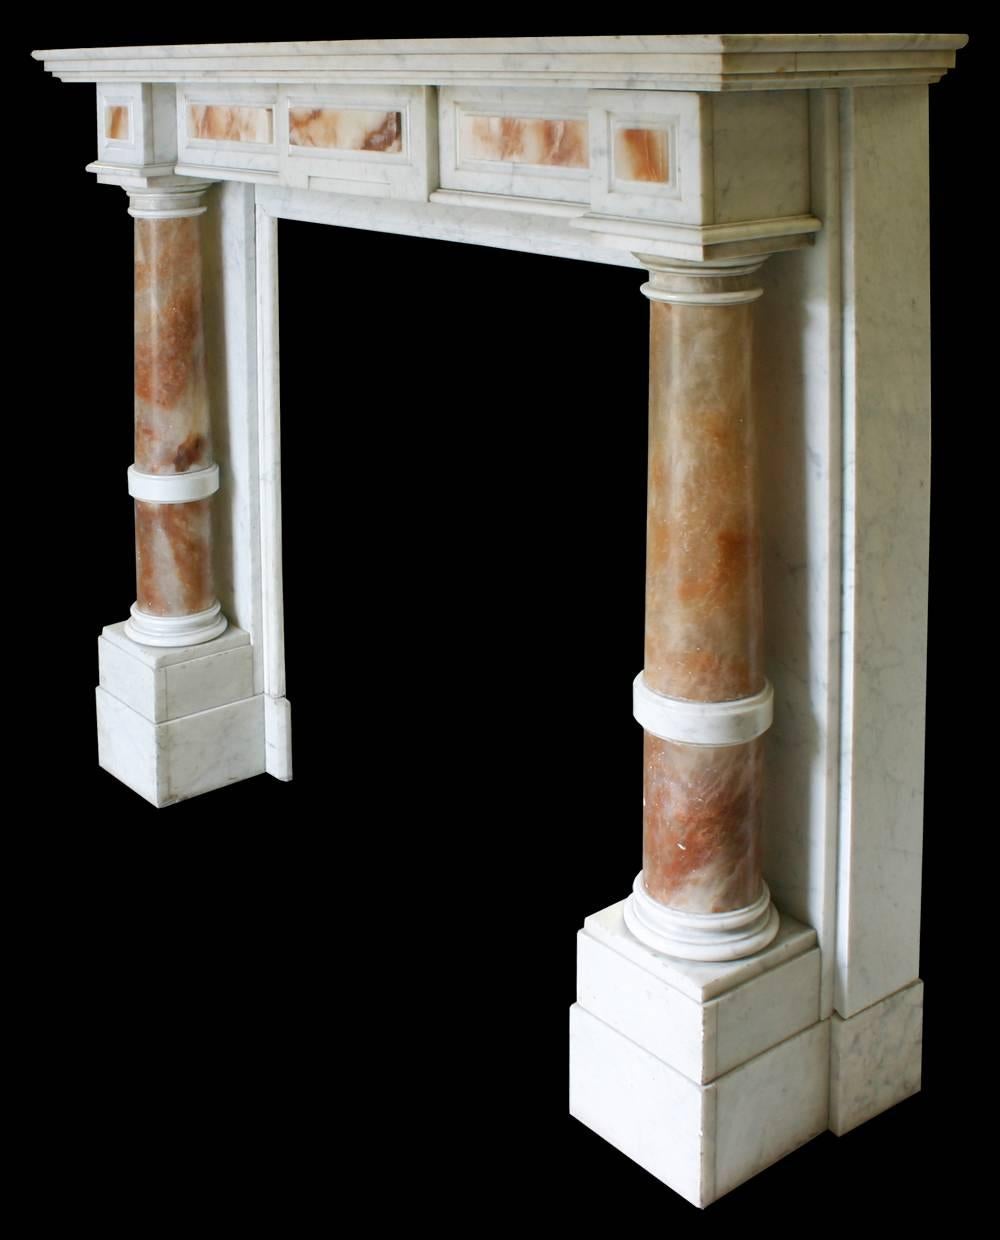 Mid-19th century continental Carrara marble fire surround, the substantial alabaster pillars support the box frieze which is decorated with alabaster mounts and is in turn surmounted by the heavily moulded shelf. circa 1870.
Images prior to